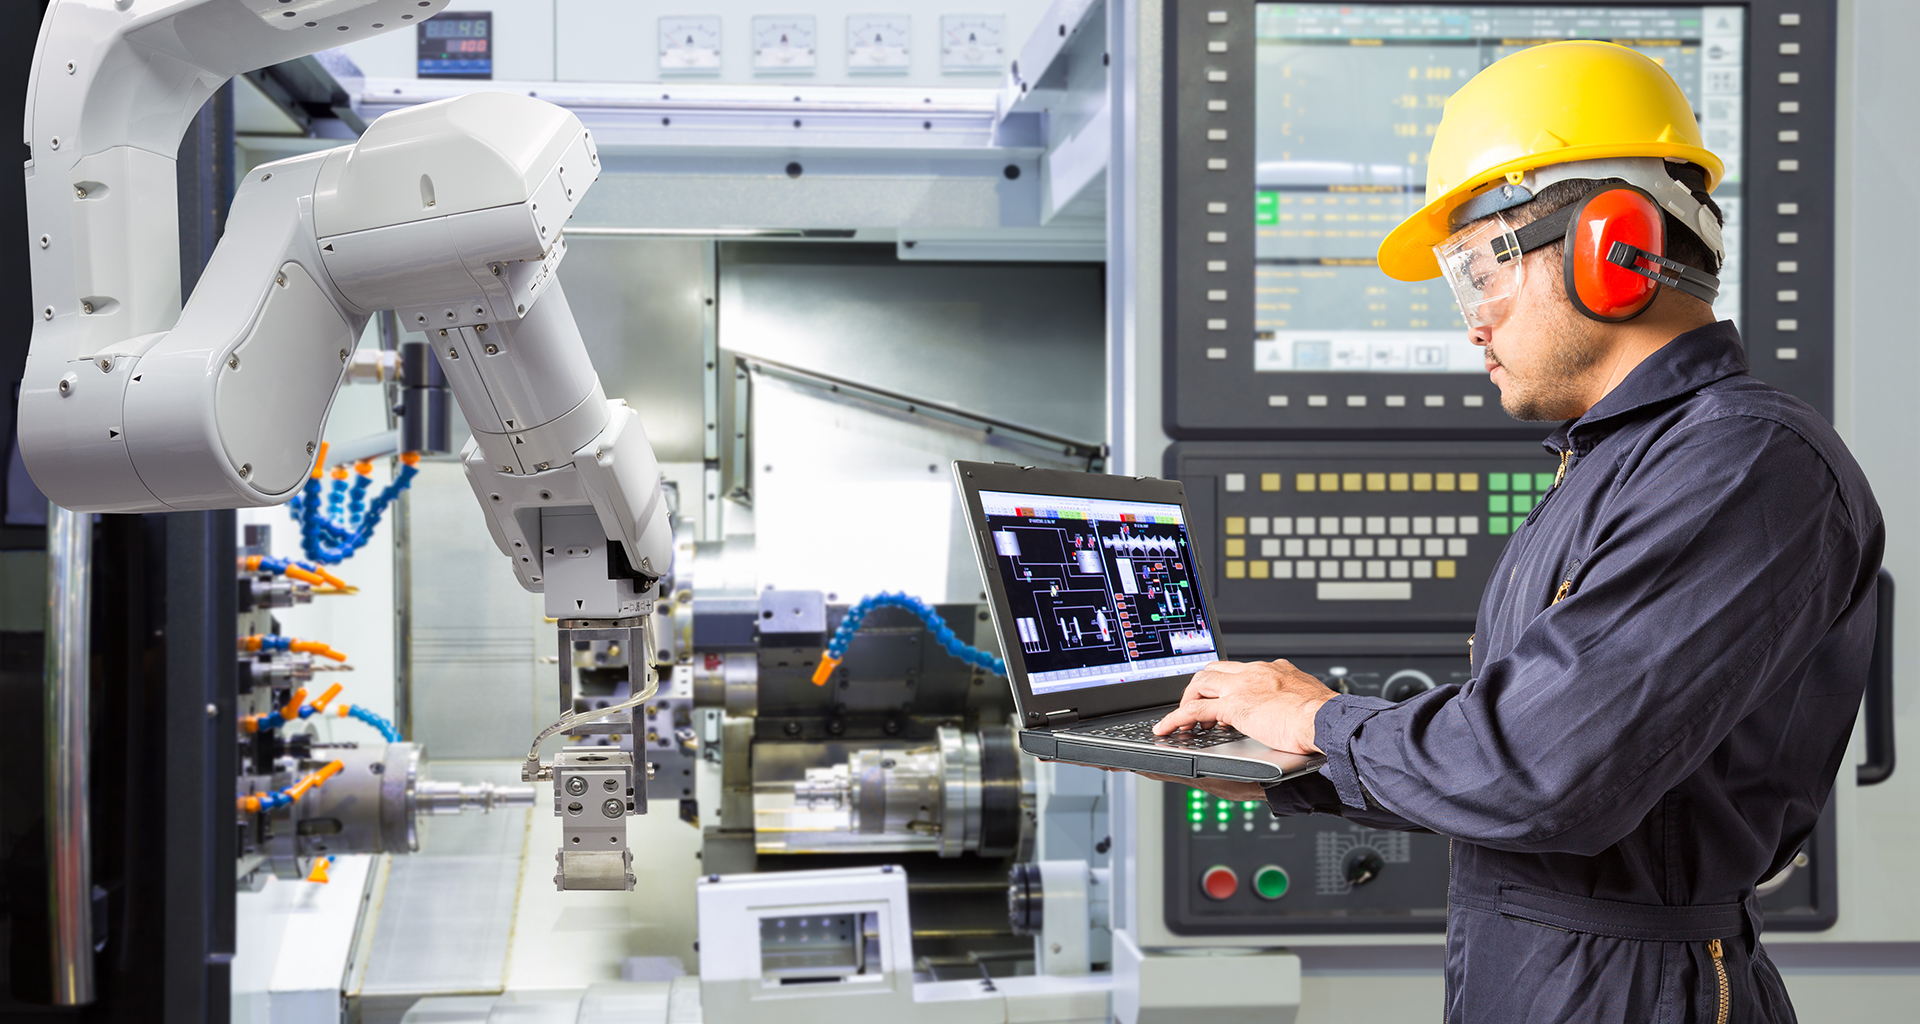 Operator using a laptop to monitor or control a robot in a production line